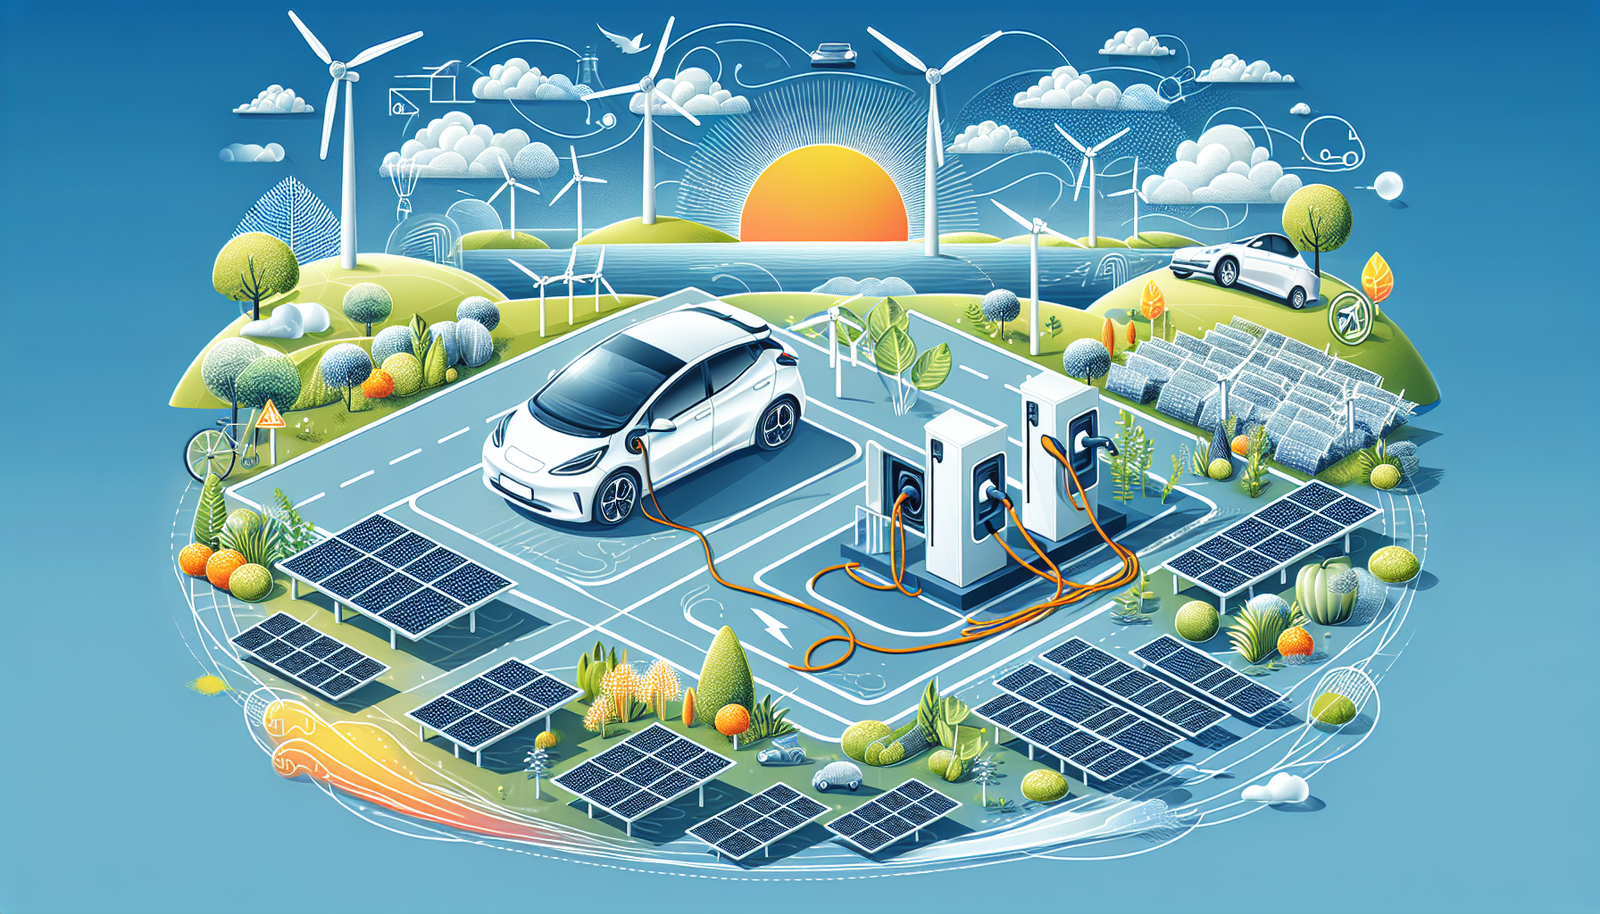 How Can I Charge My Electric Vehicle Using Renewable Energy Sources?